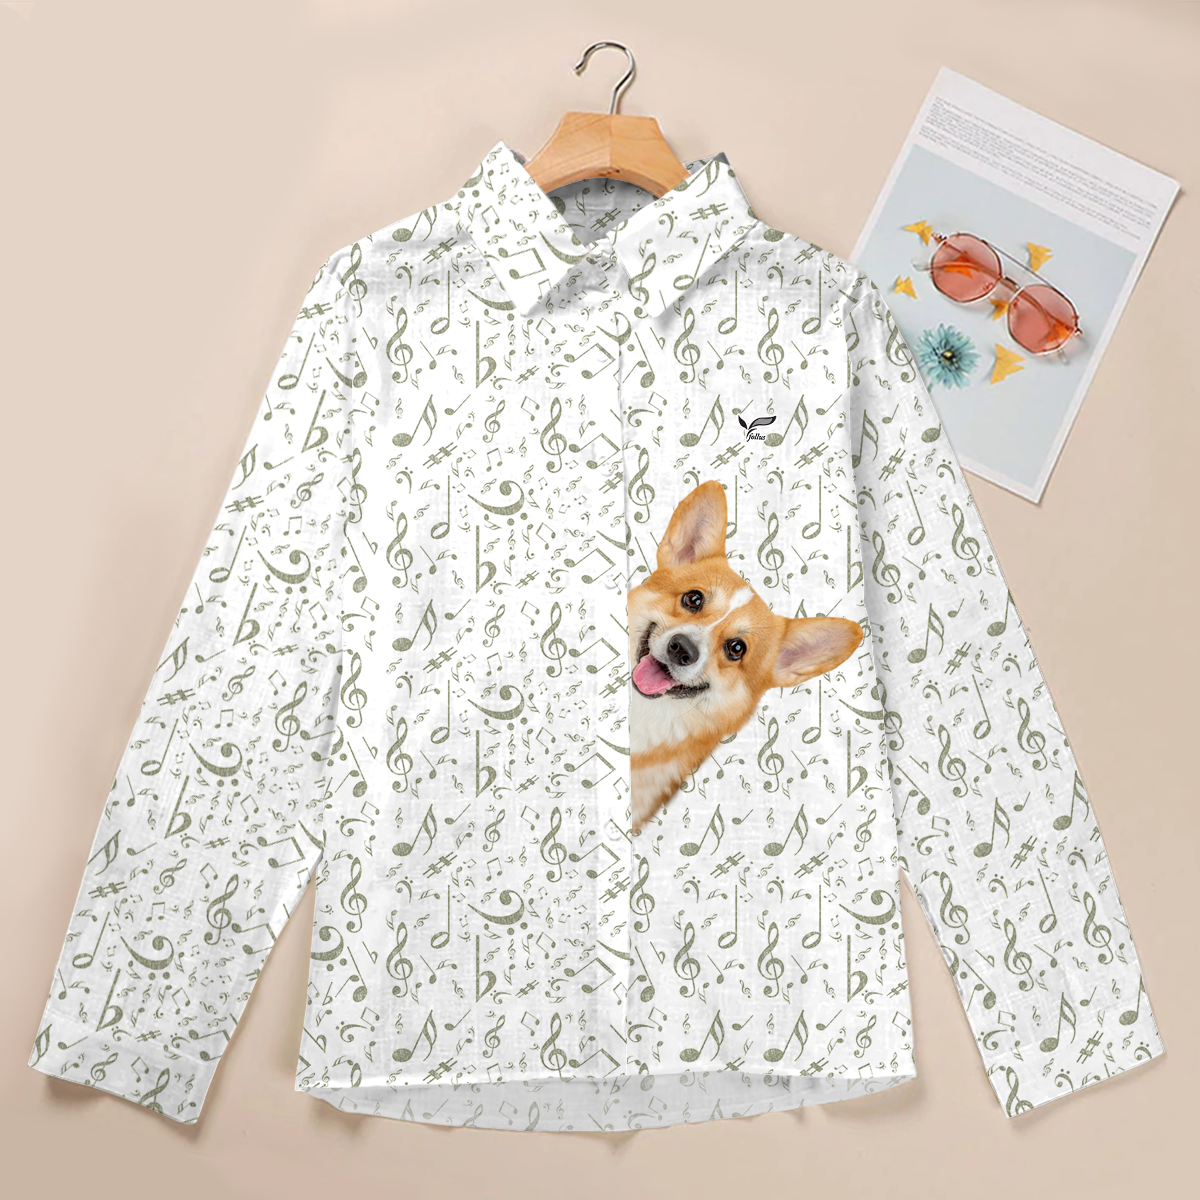 Music And Welsh Corgi Are All You Need - Follus Women's Long-Sleeve Shirt